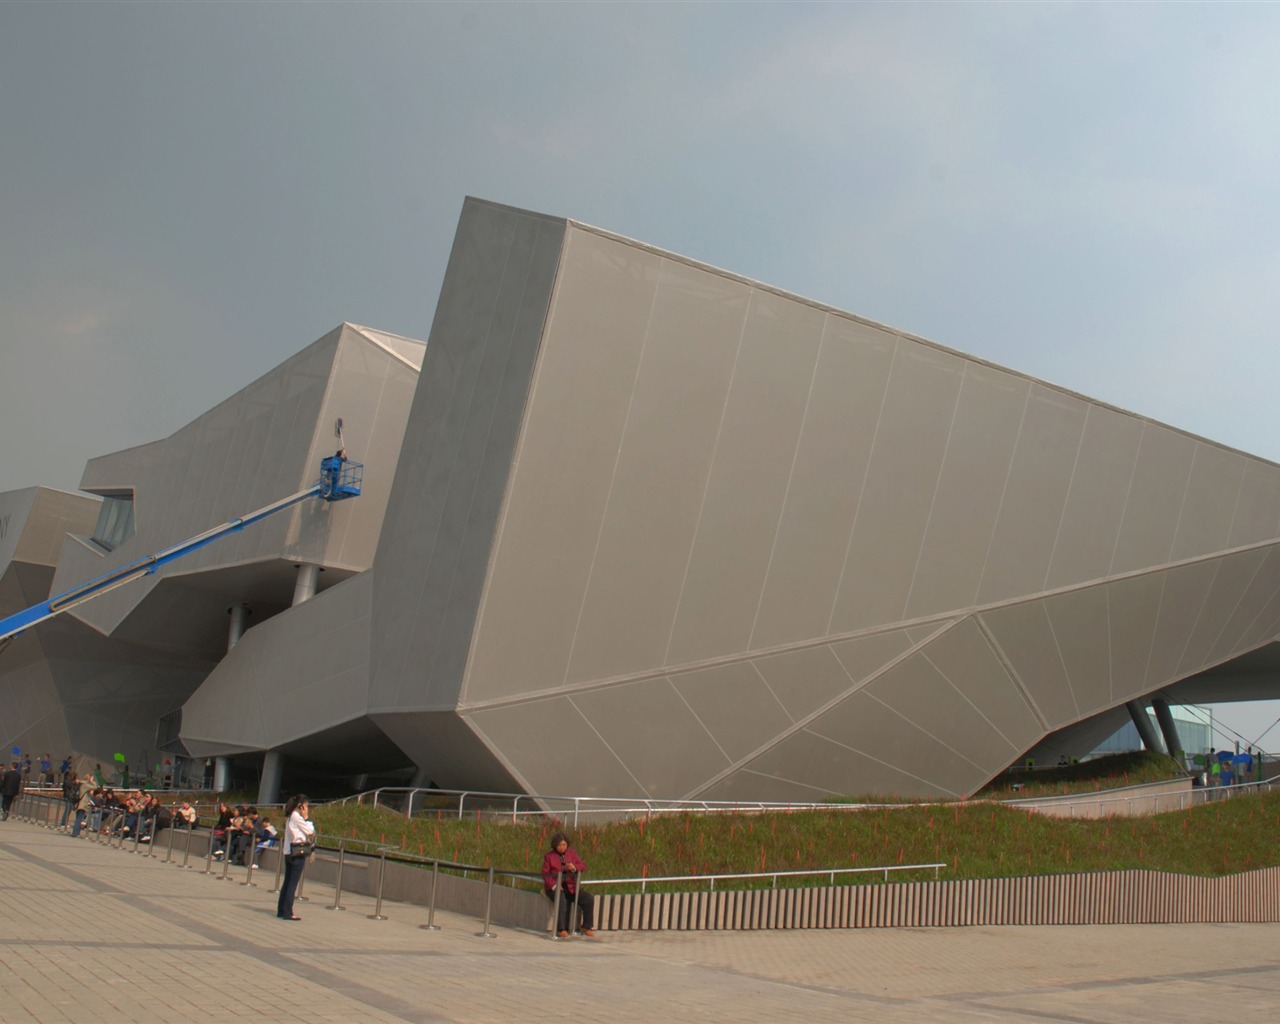 Commissioning of the 2010 Shanghai World Expo (studious works) #21 - 1280x1024